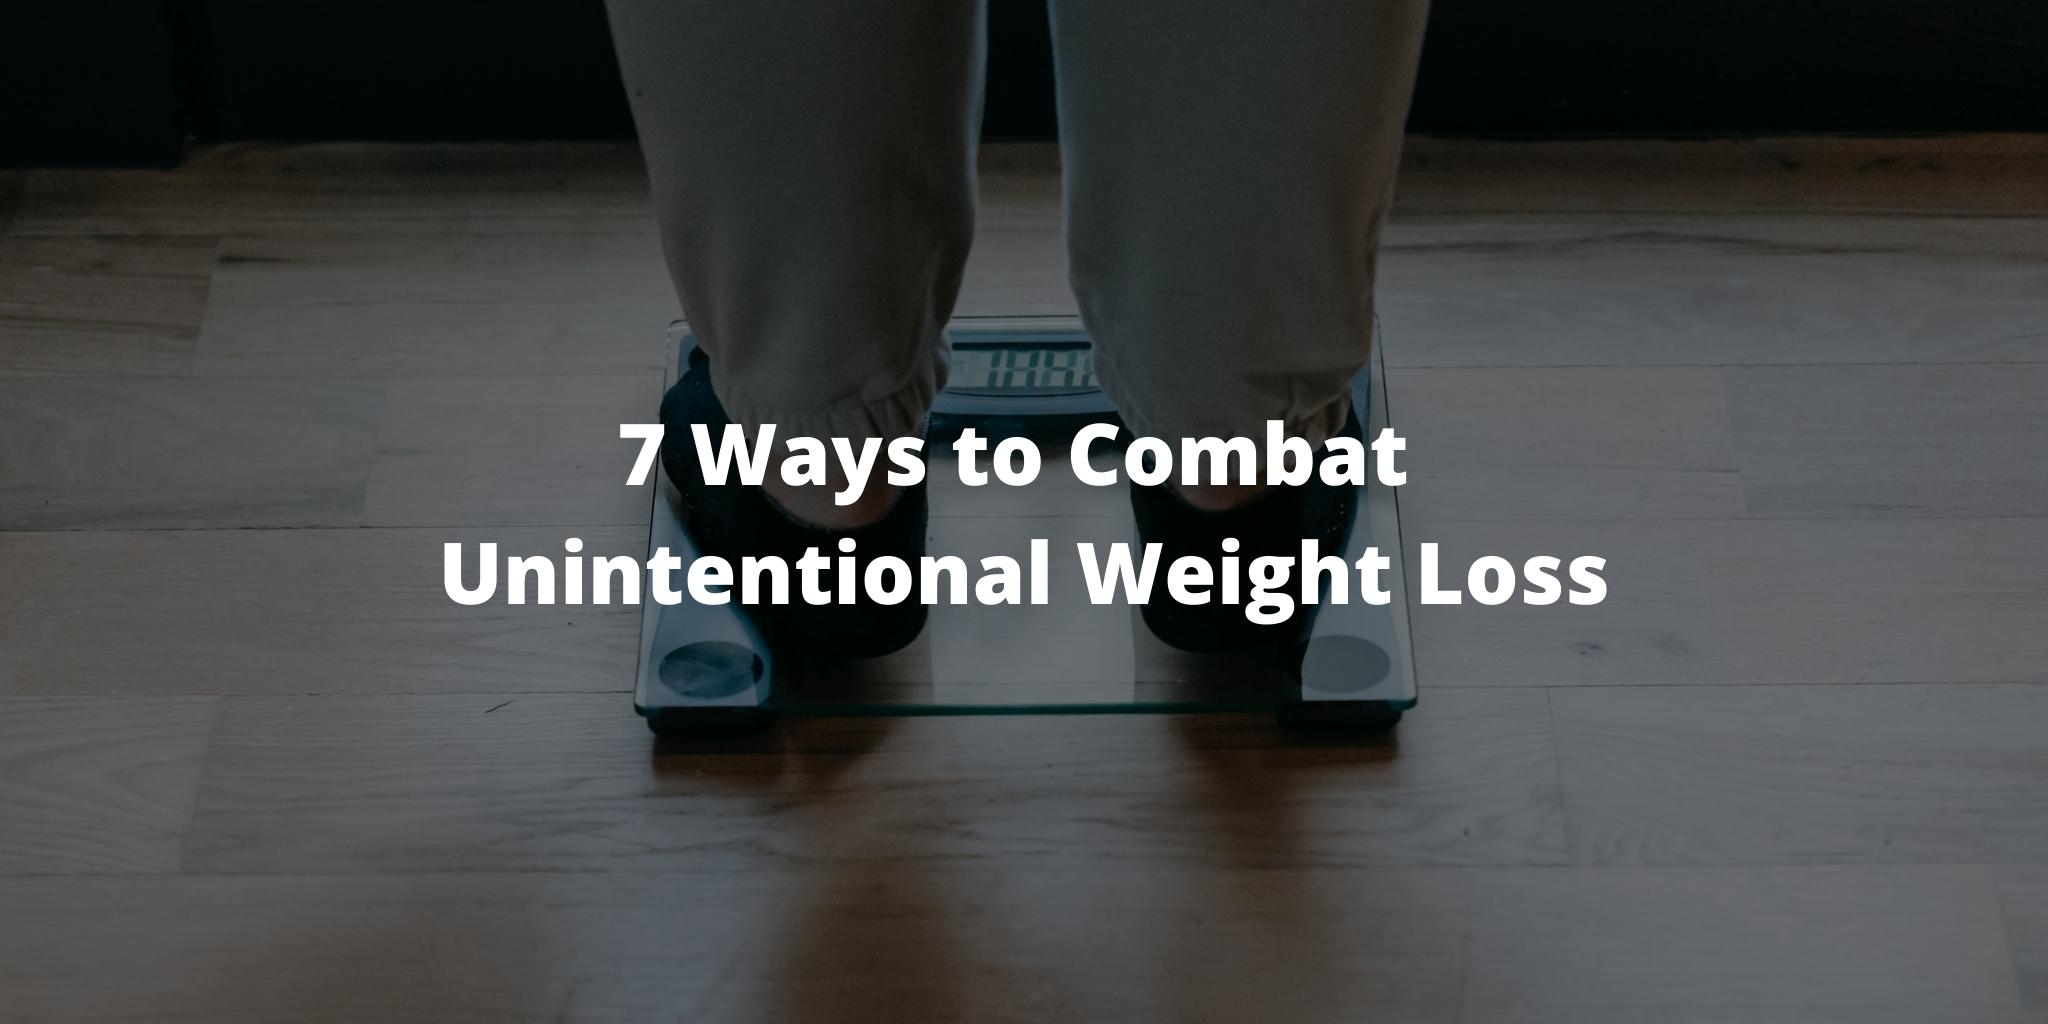 7 Ways to Combat Unintentional Weight Loss